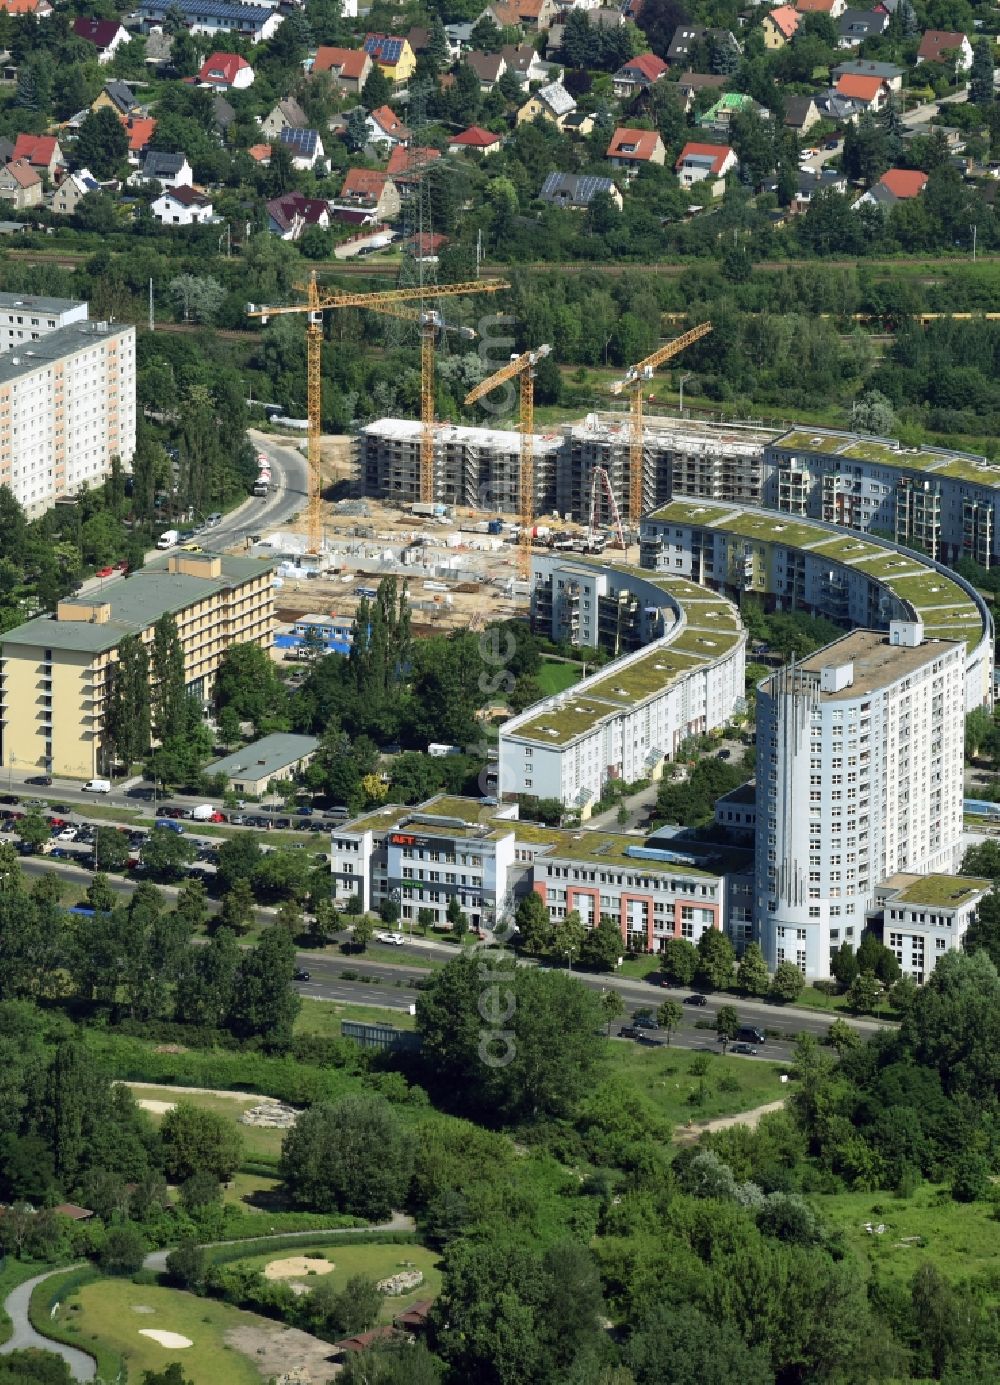 Berlin from the bird's eye view: Construction site of a new multi-family residential area with apartment buildings on Gensinger Strasse in the Lichtenberg district of Berlin, Germany